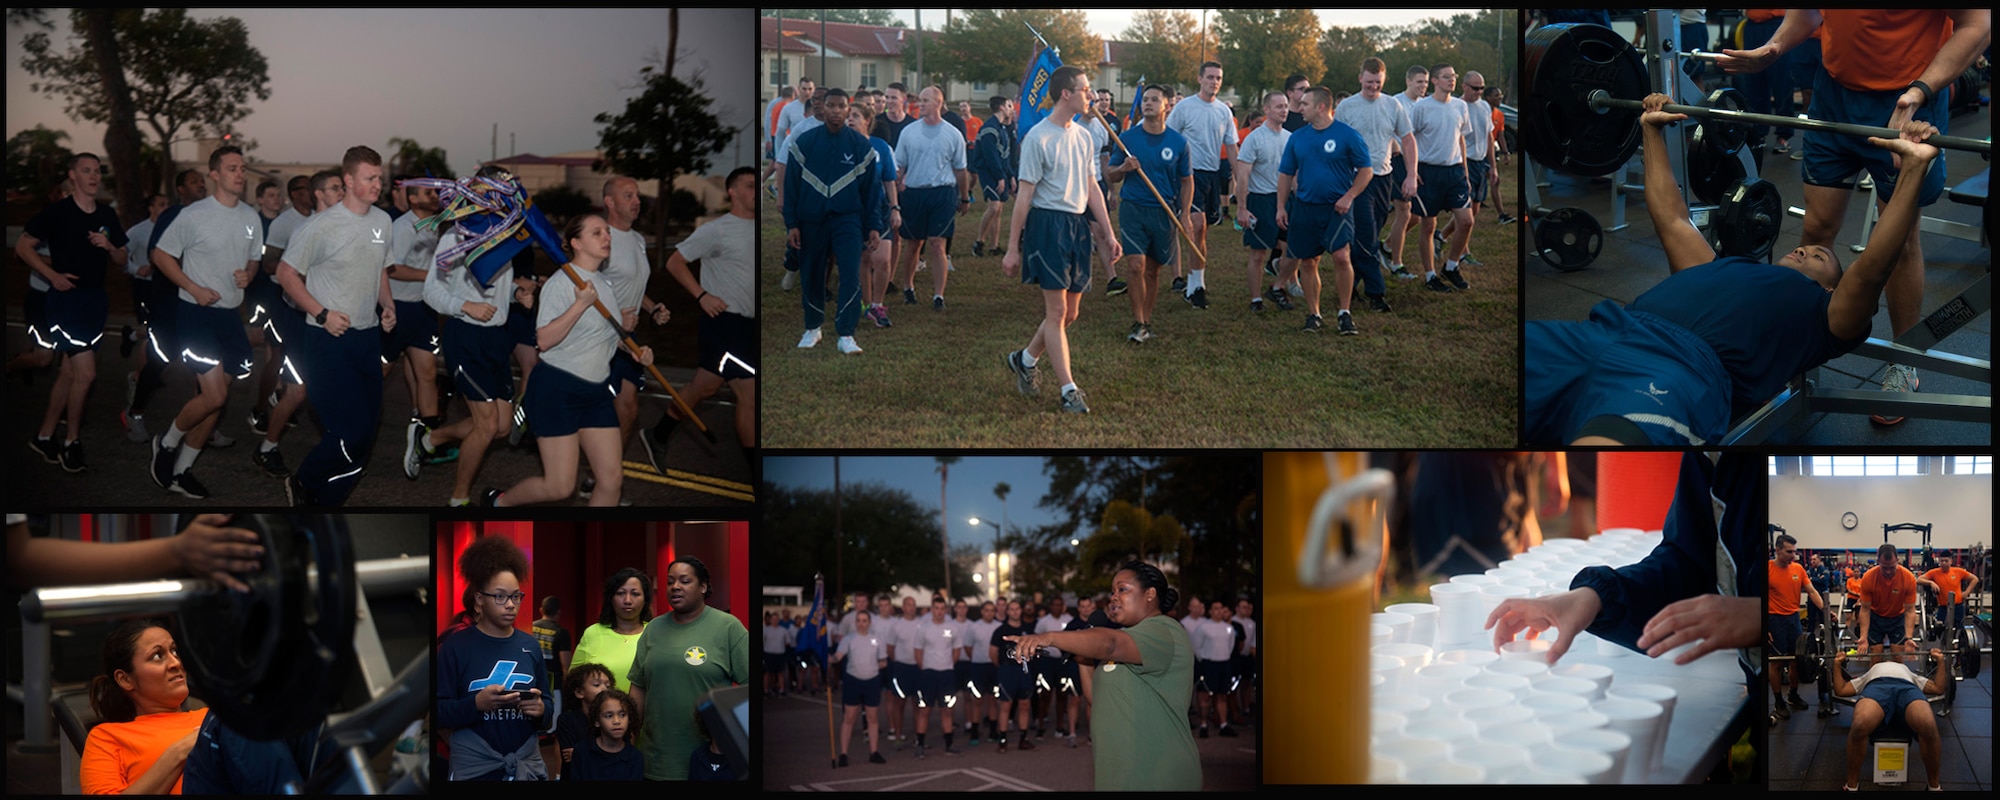 The 6th Communications Squadron hosted the 4th annual 5k and weight lifting competition to honor the fallen Maj. Raymond Estelle at MacDill Air Force Base, Fla., Jan 13, 2017. The event was held to honor Estelle who was passionate about fitness and weight lifting. (U.S. Air Force photo by Airman 1st Class Rito Smith) 